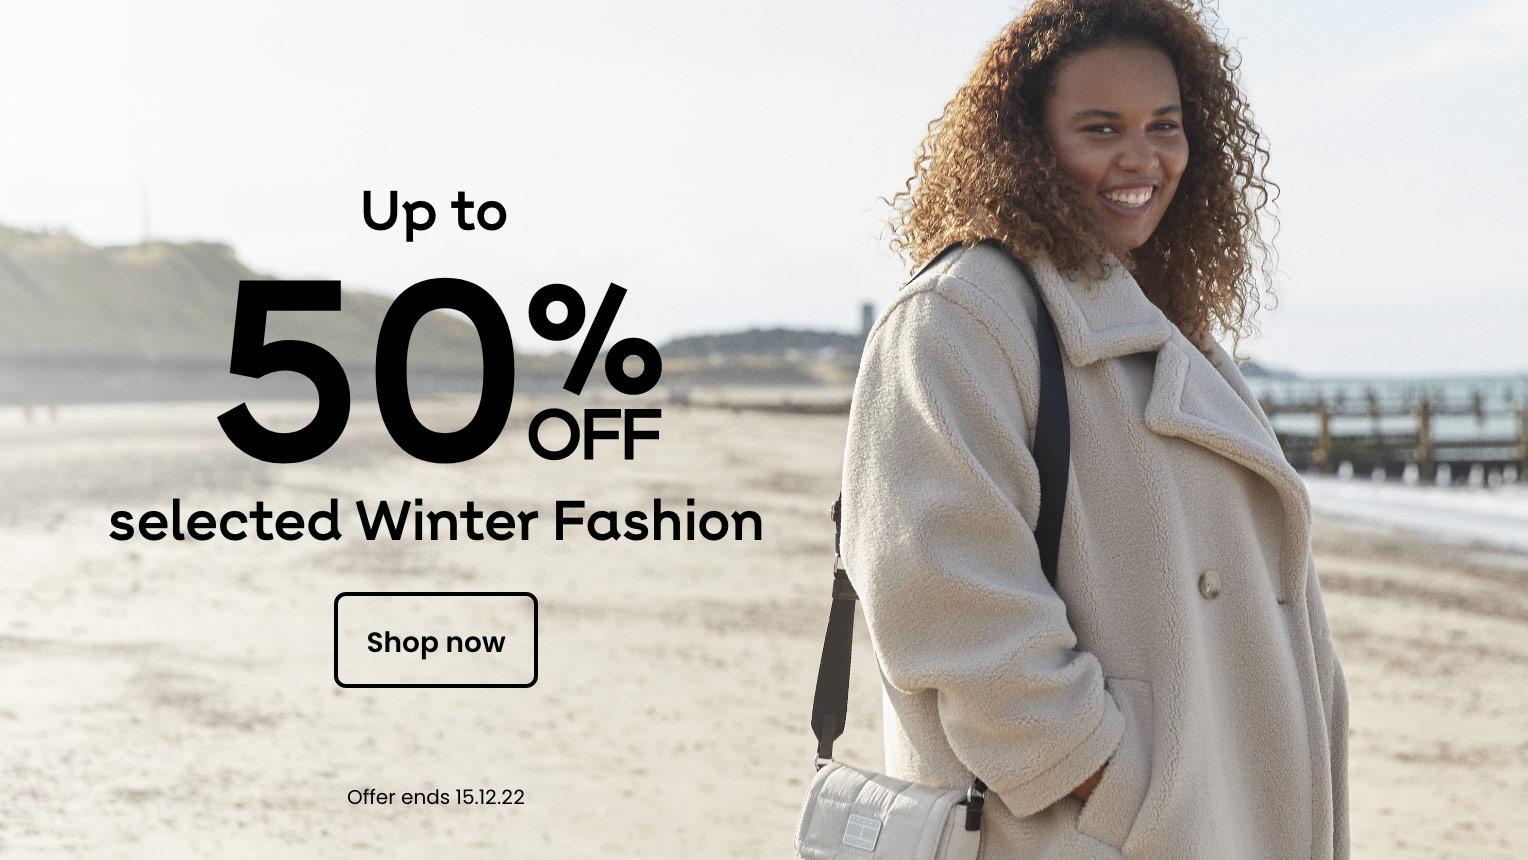 Up to 50% off selected Winter Fashion